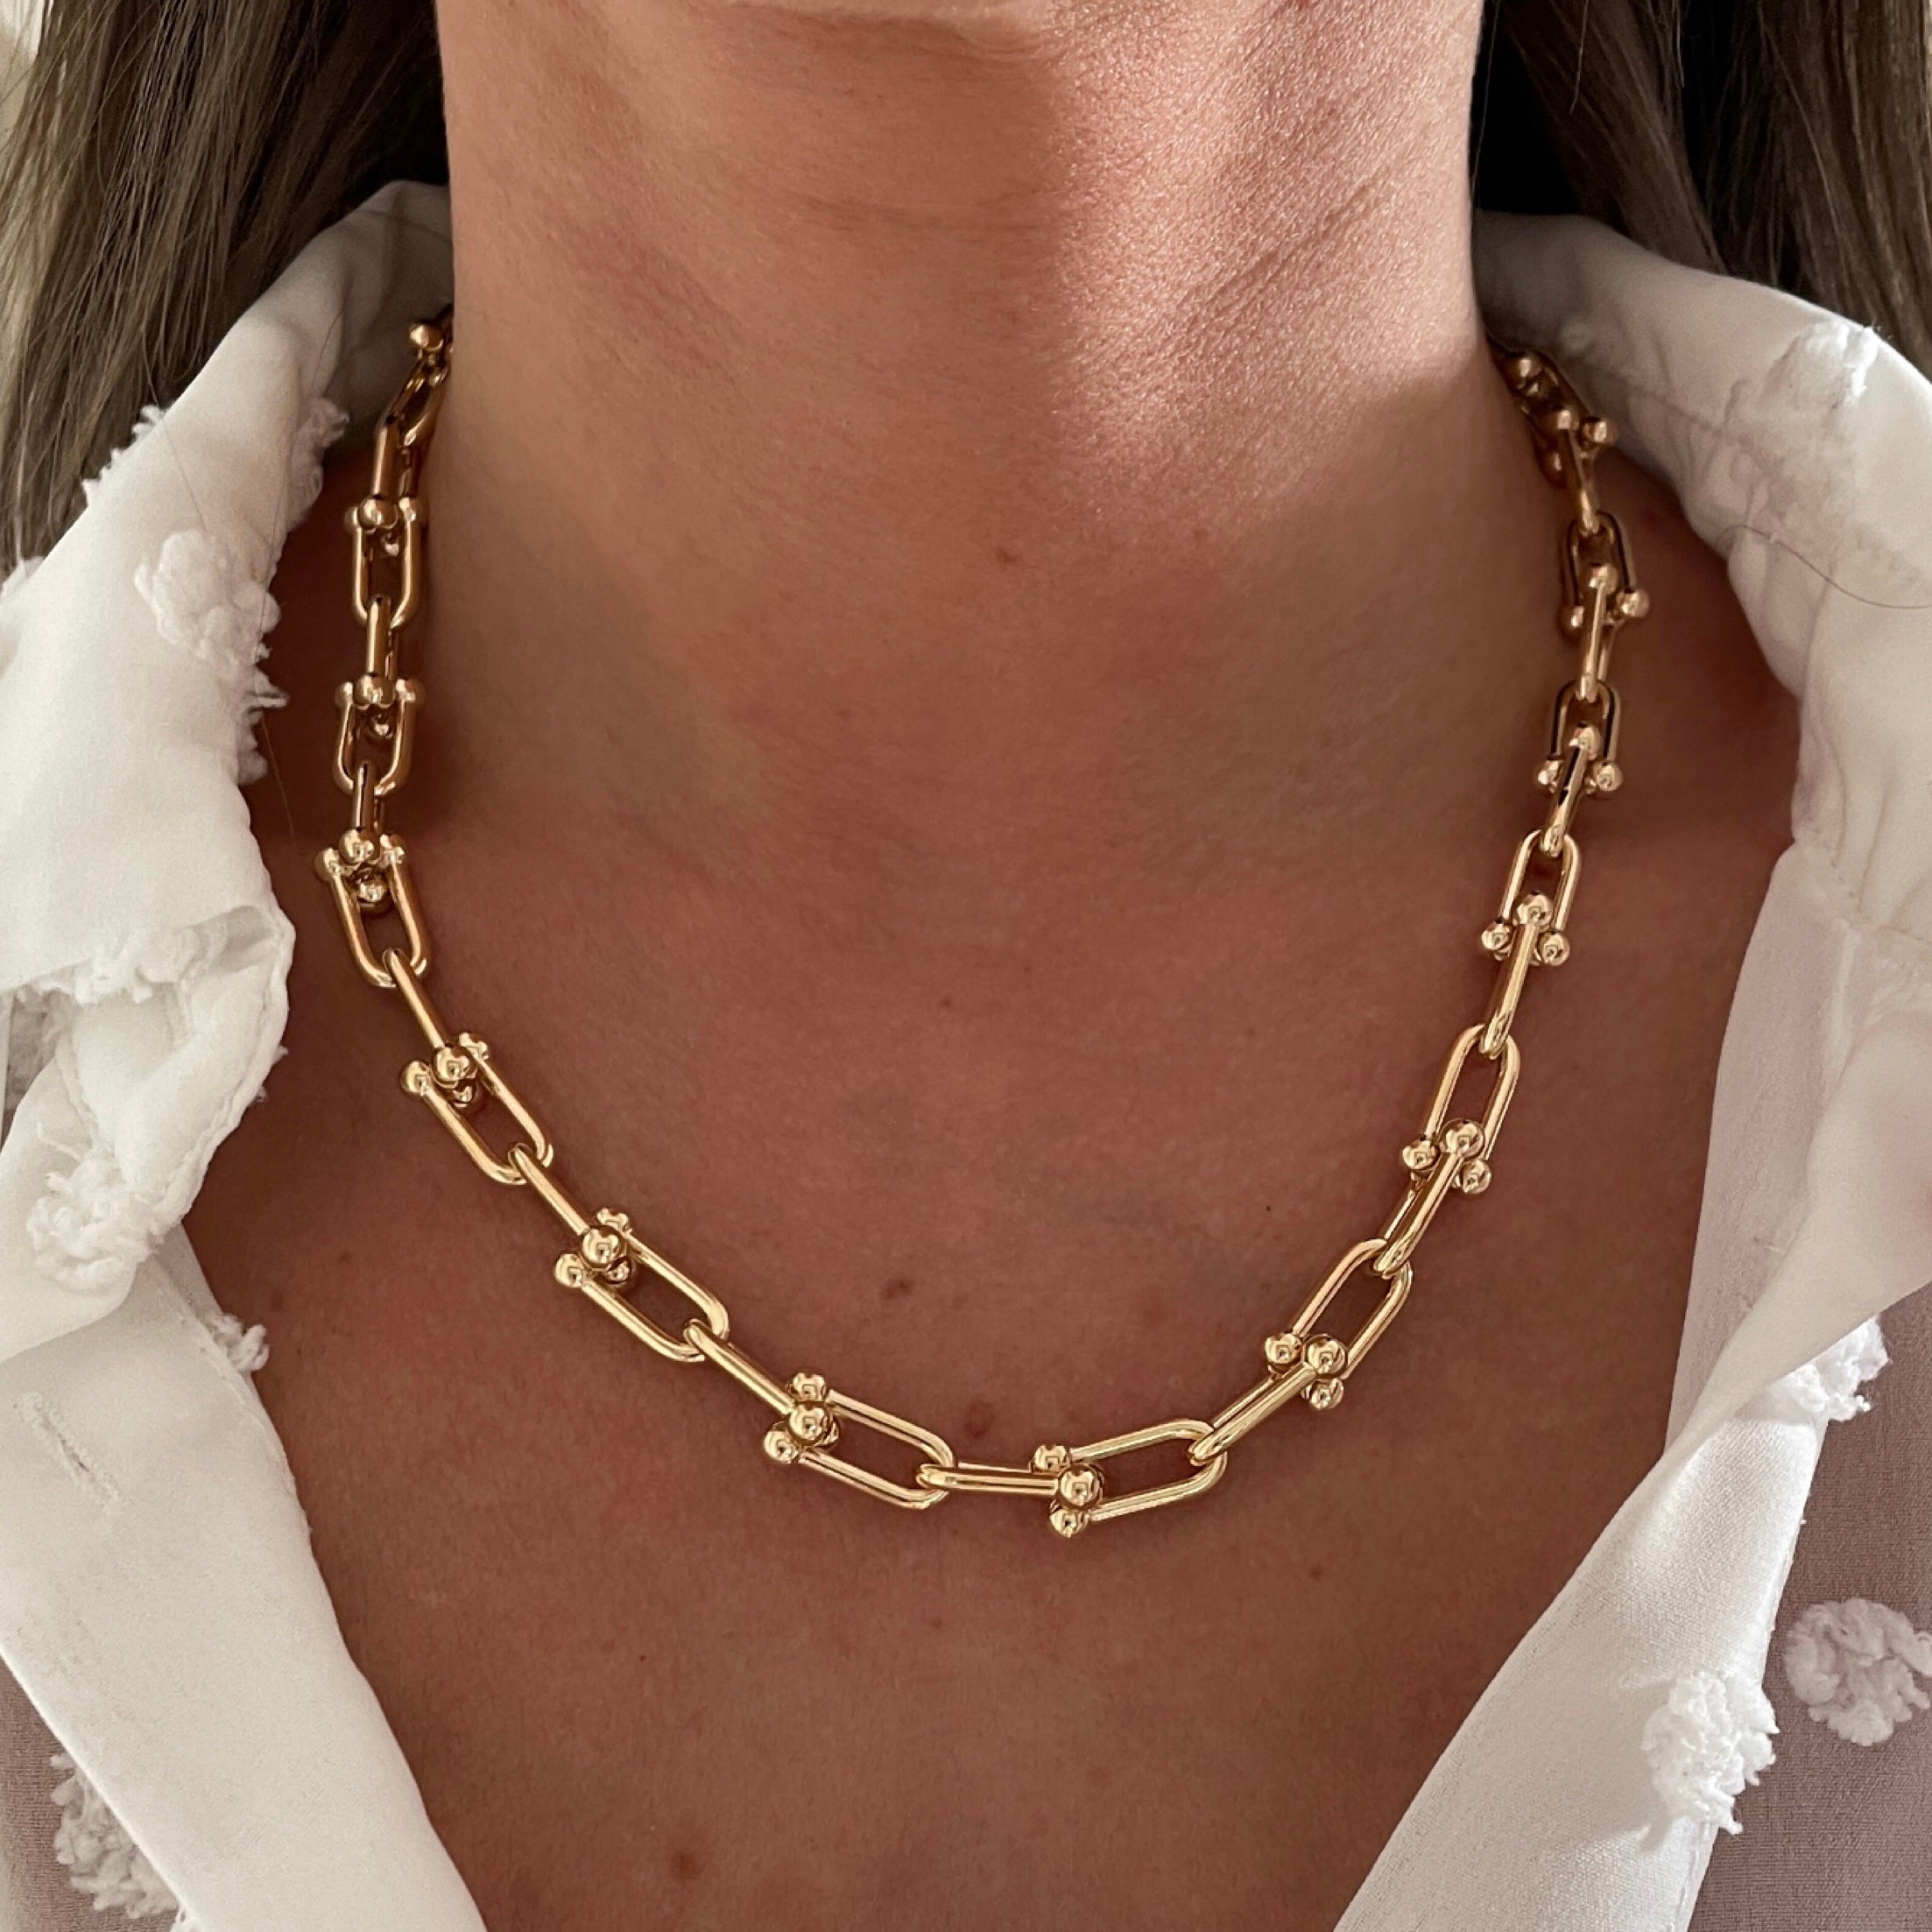 Gold-plated “Links” necklace